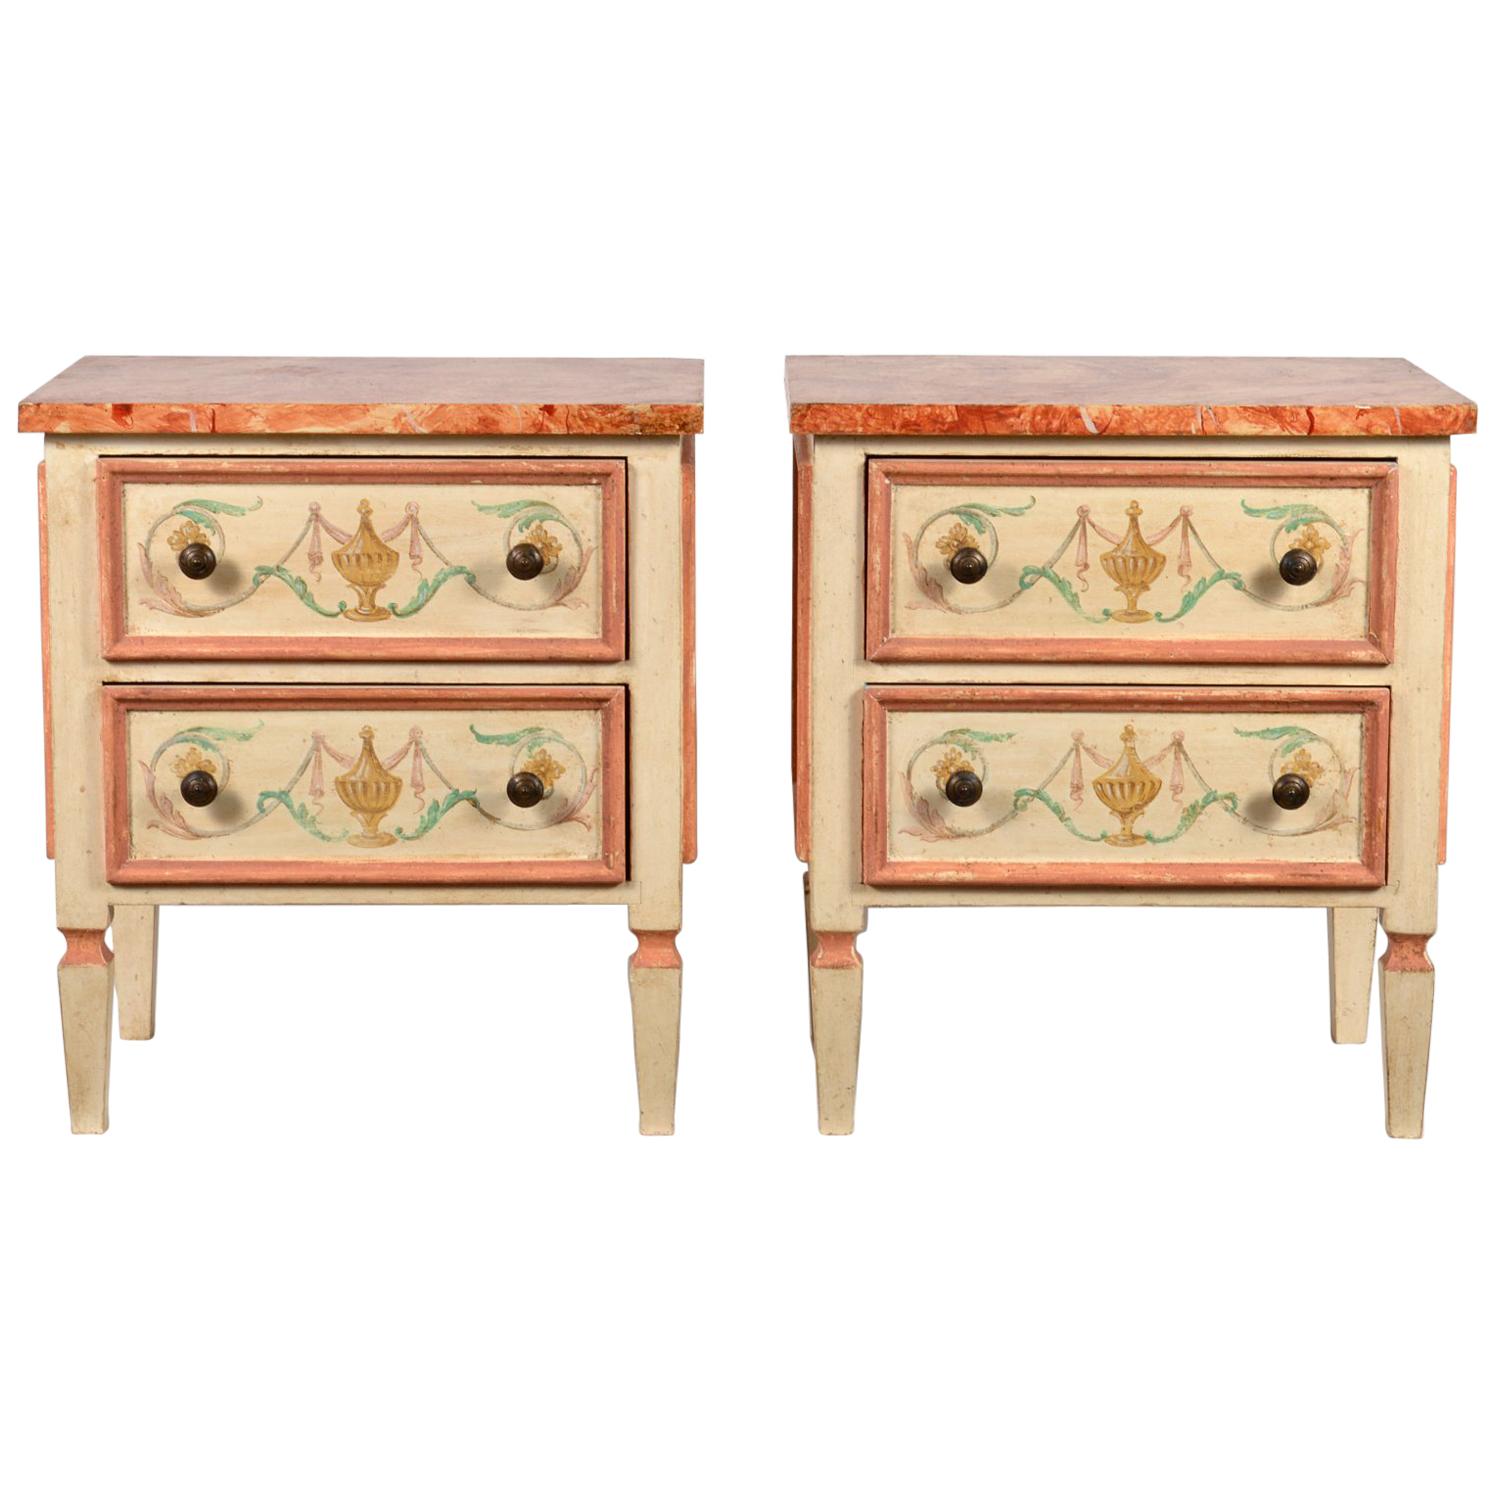 Pair of Italian Midcentury Painted and Marbleised Petite Two-Drawer Commodes